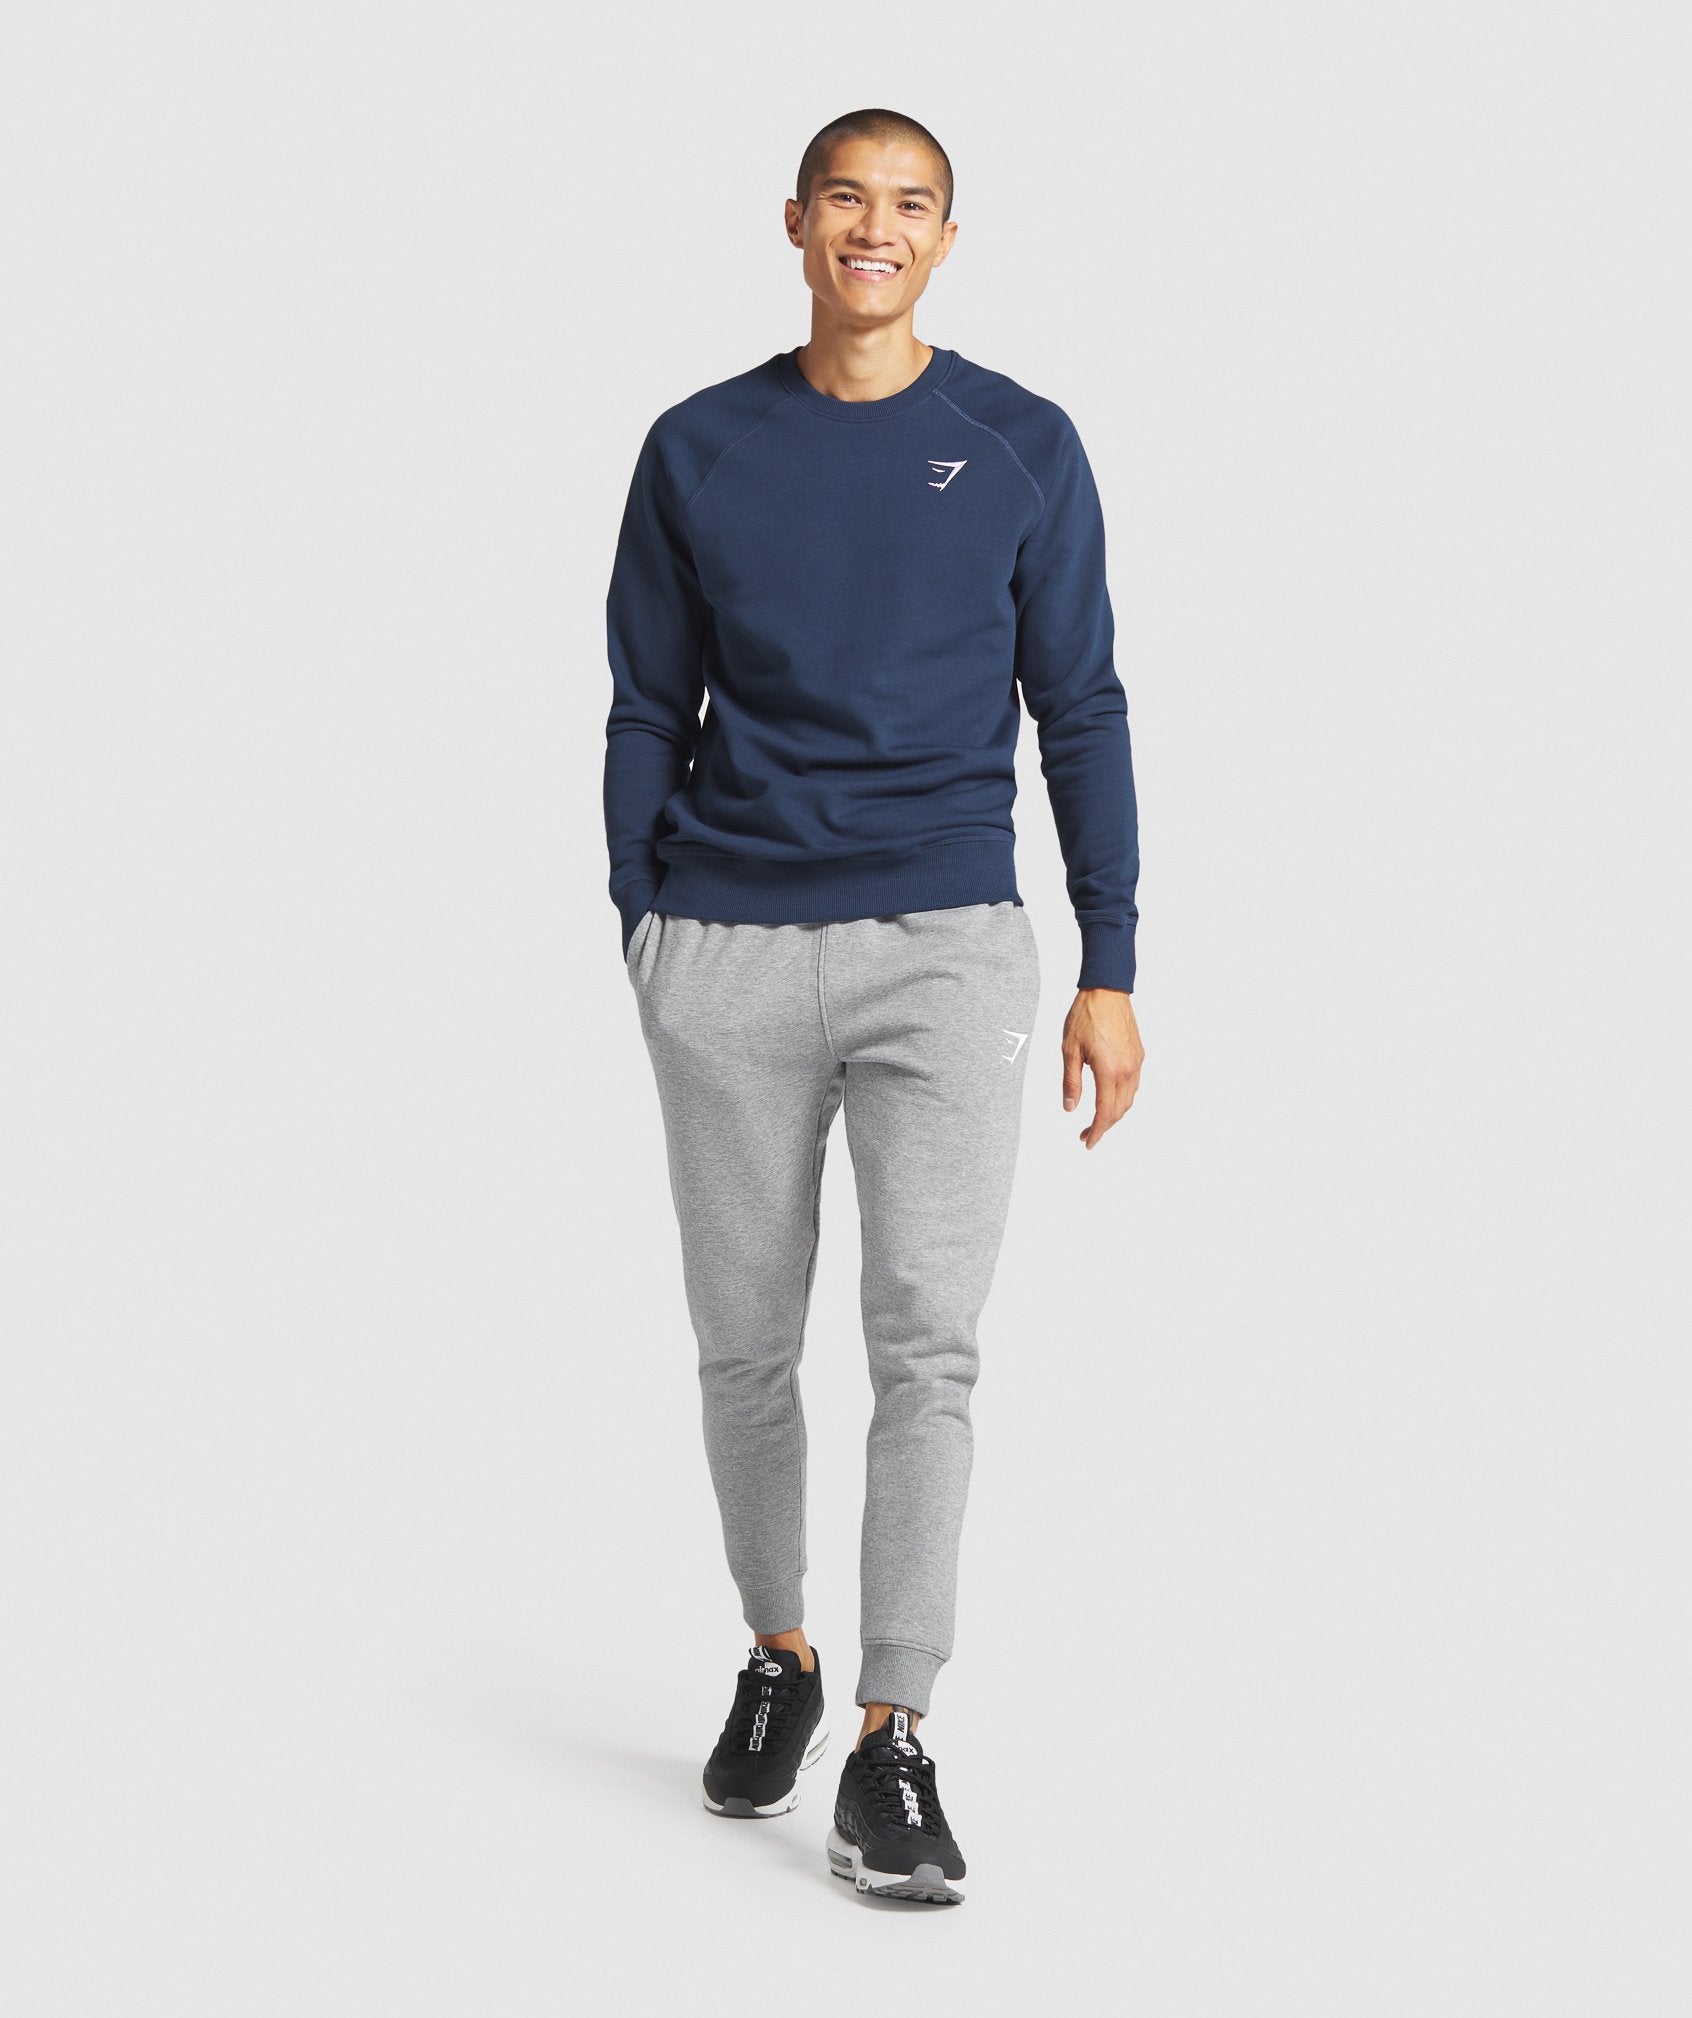 Crest Joggers in Charcoal Marl - view 5